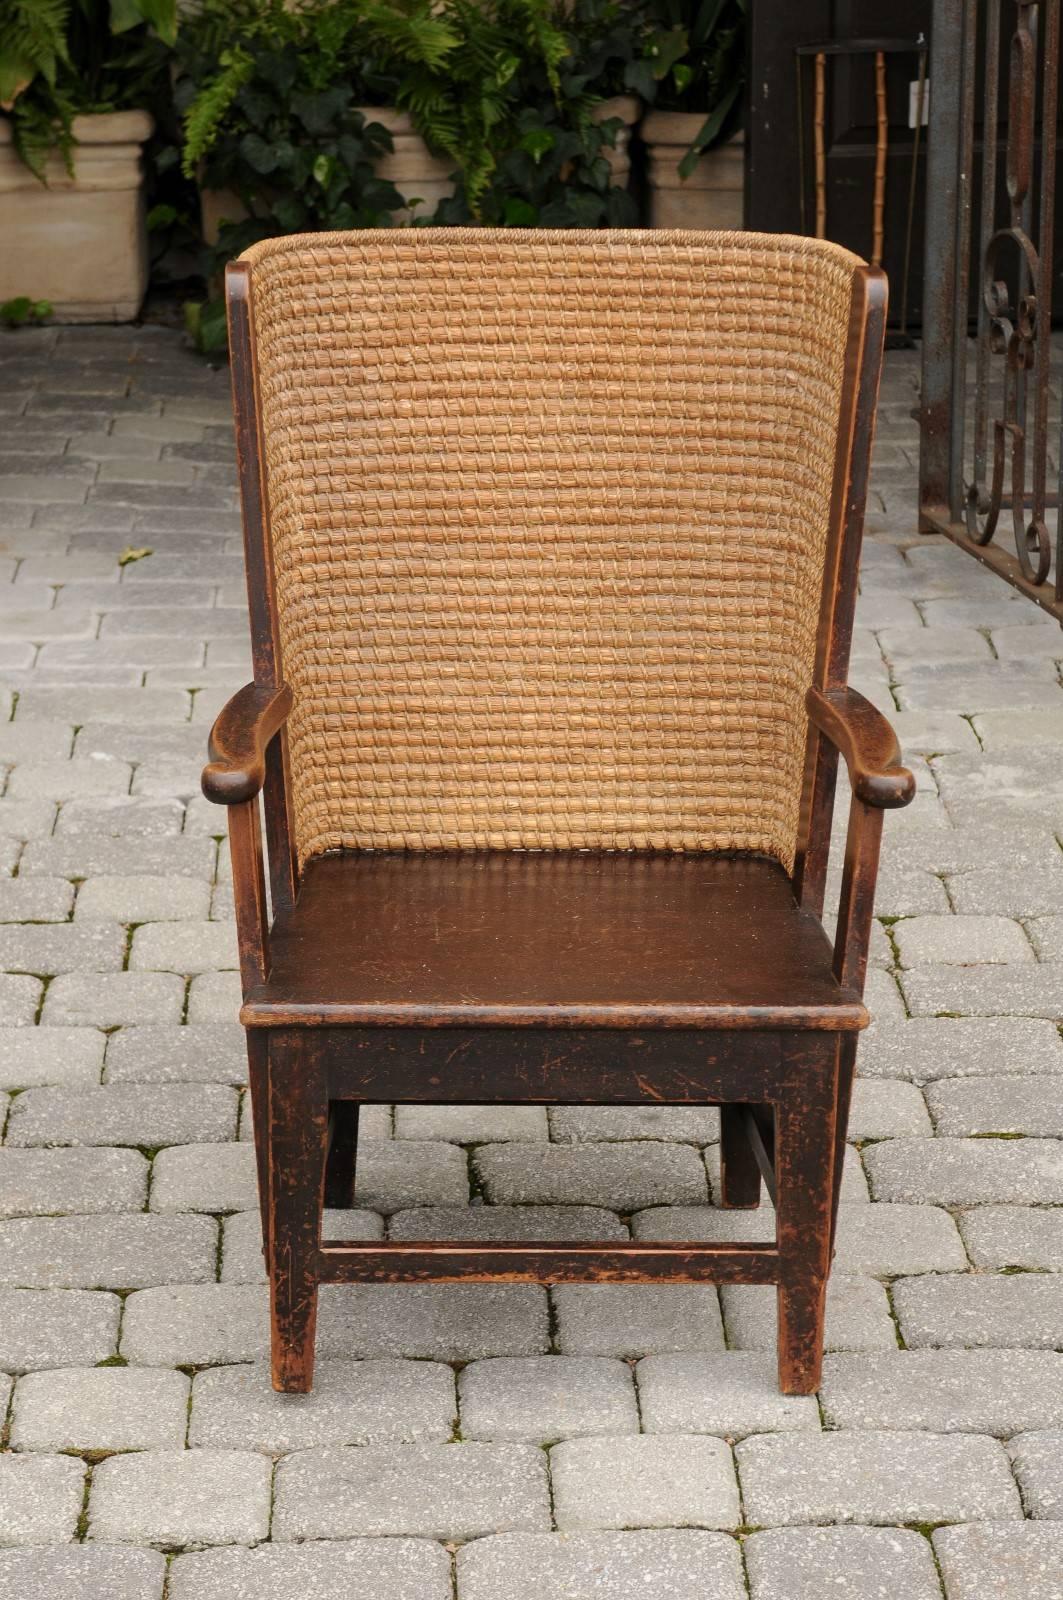 Antique Scottish Mid-19th Century Orkney Chair with Handwoven Straw Back 5